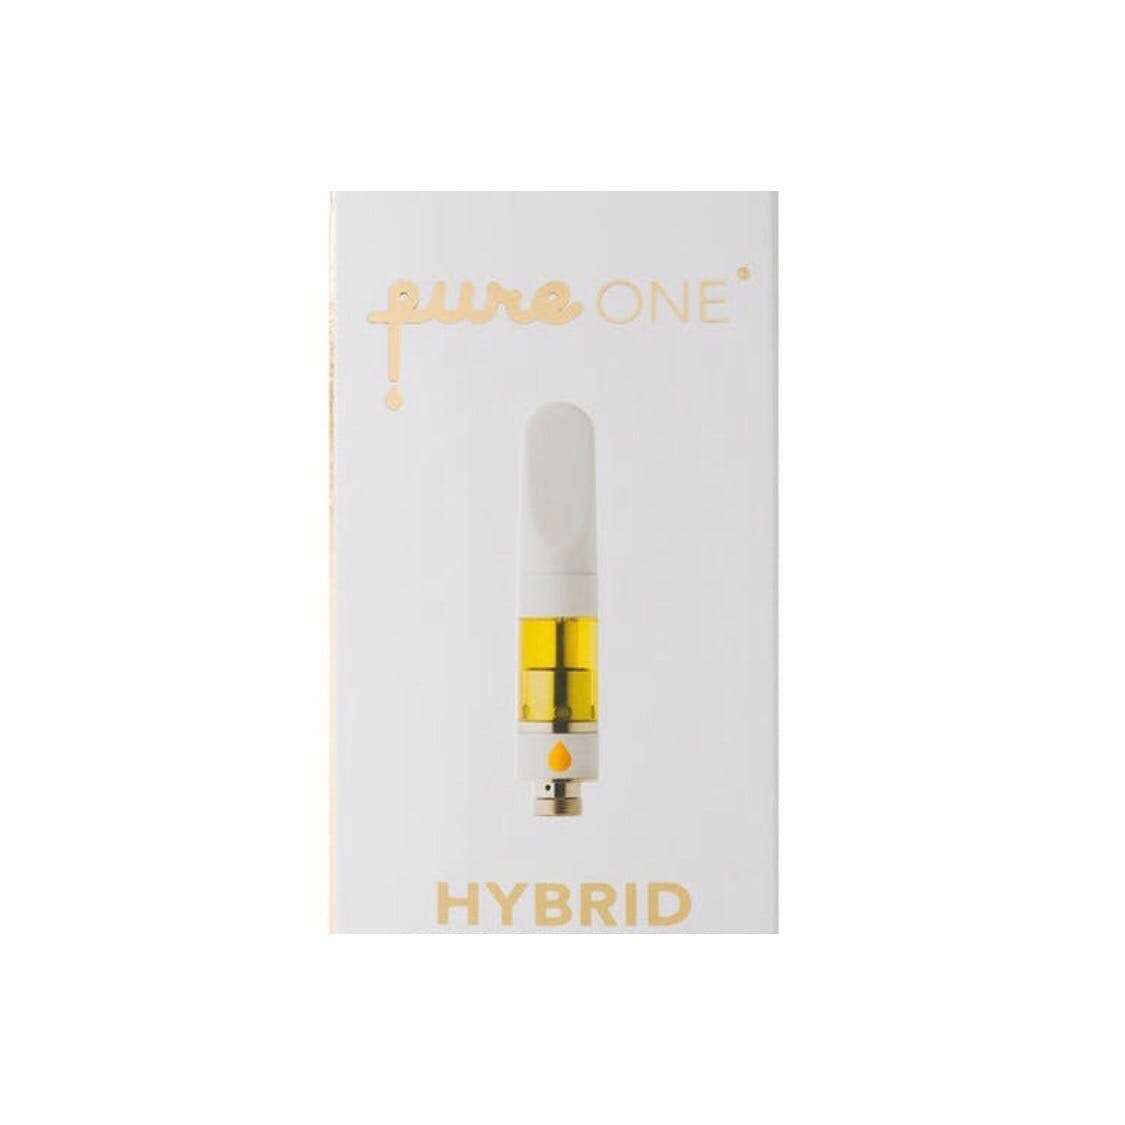 concentrate-pure-one-cartridge-hybrid